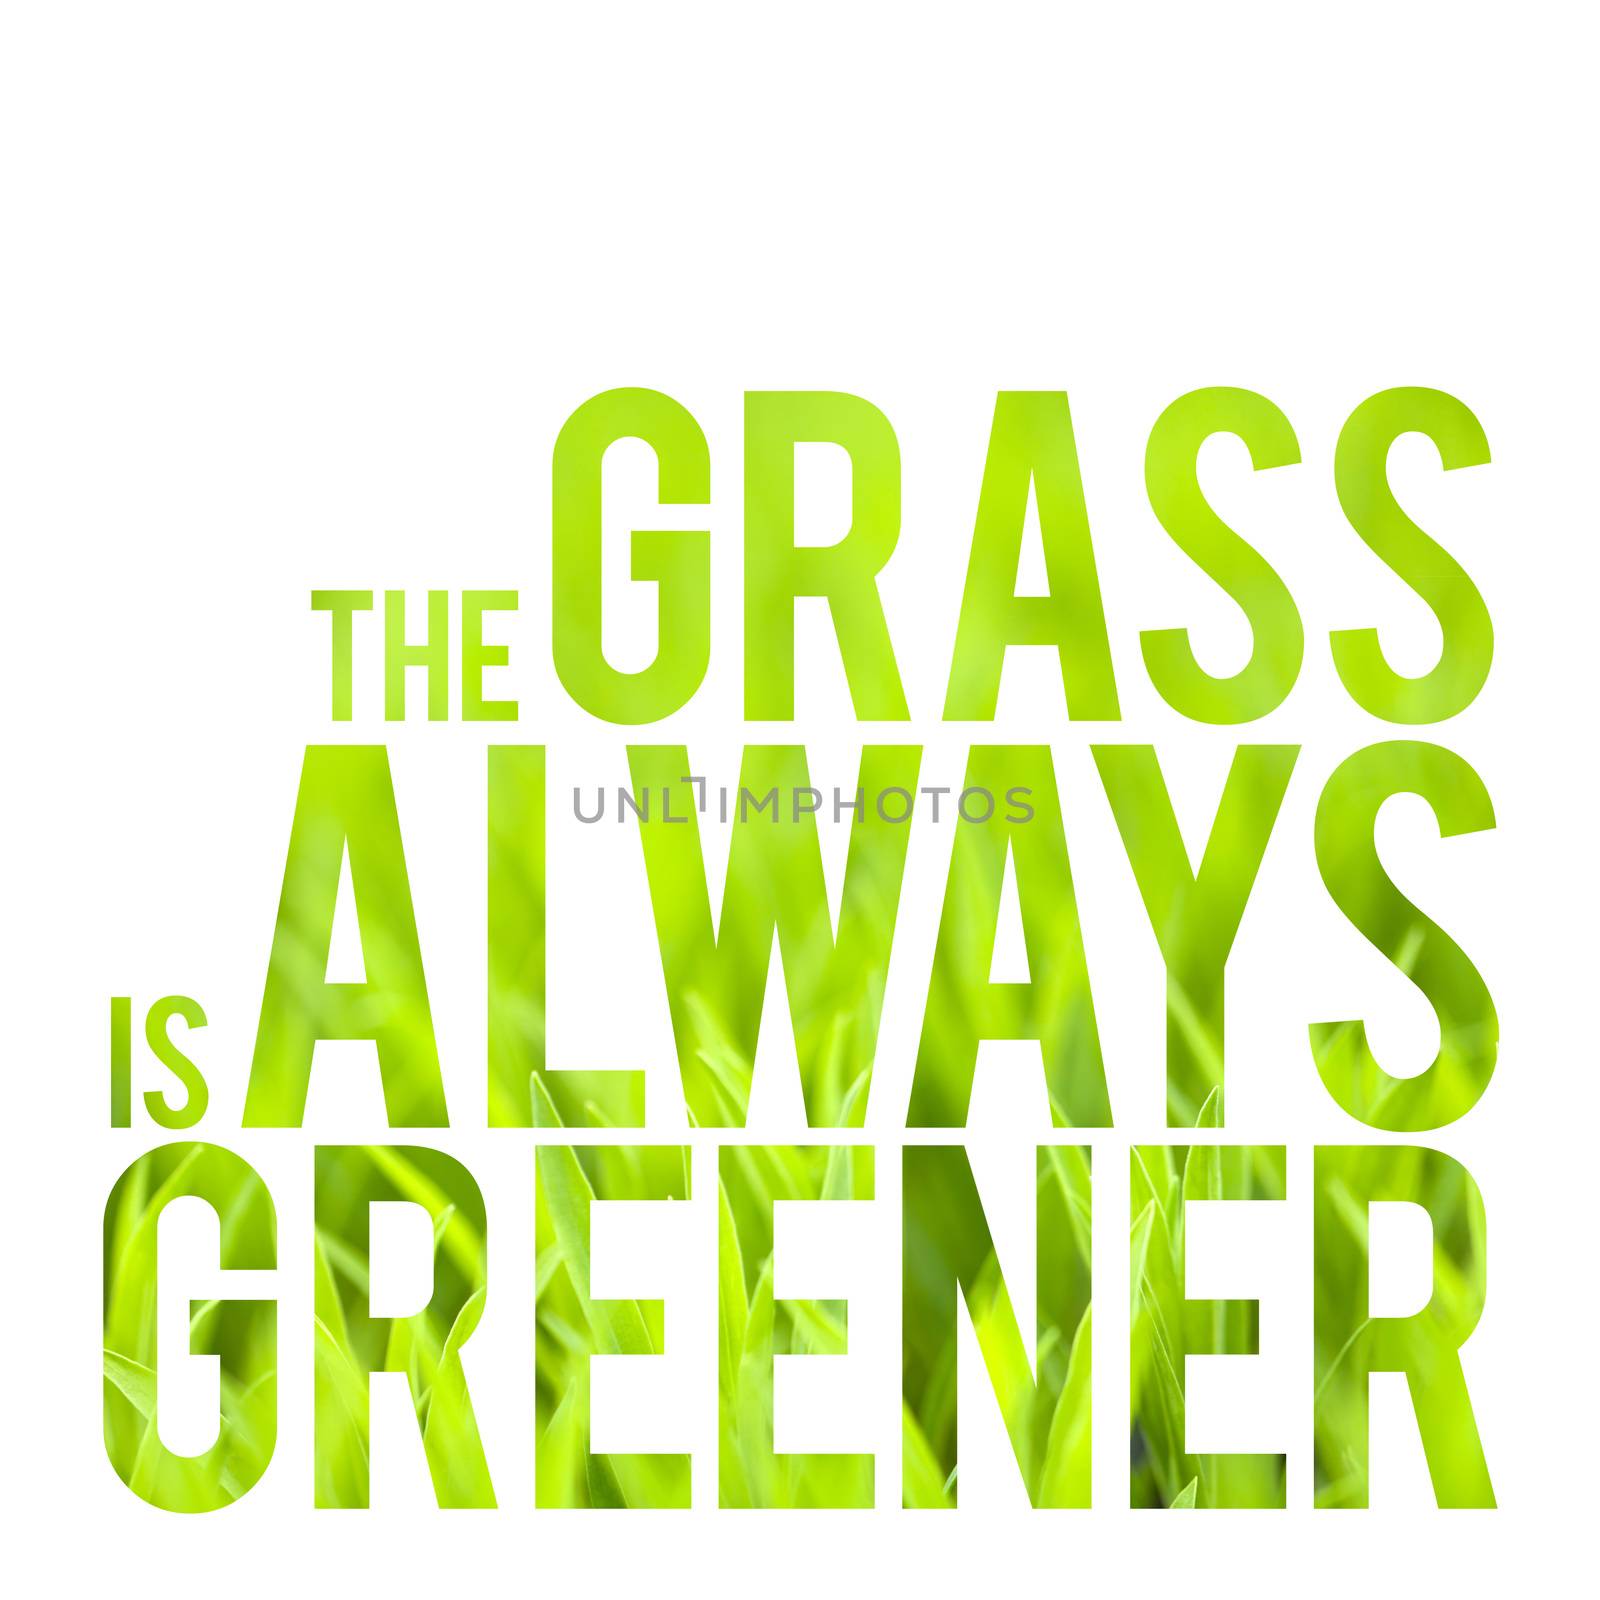 The Grass is Always Greener by graficallyminded